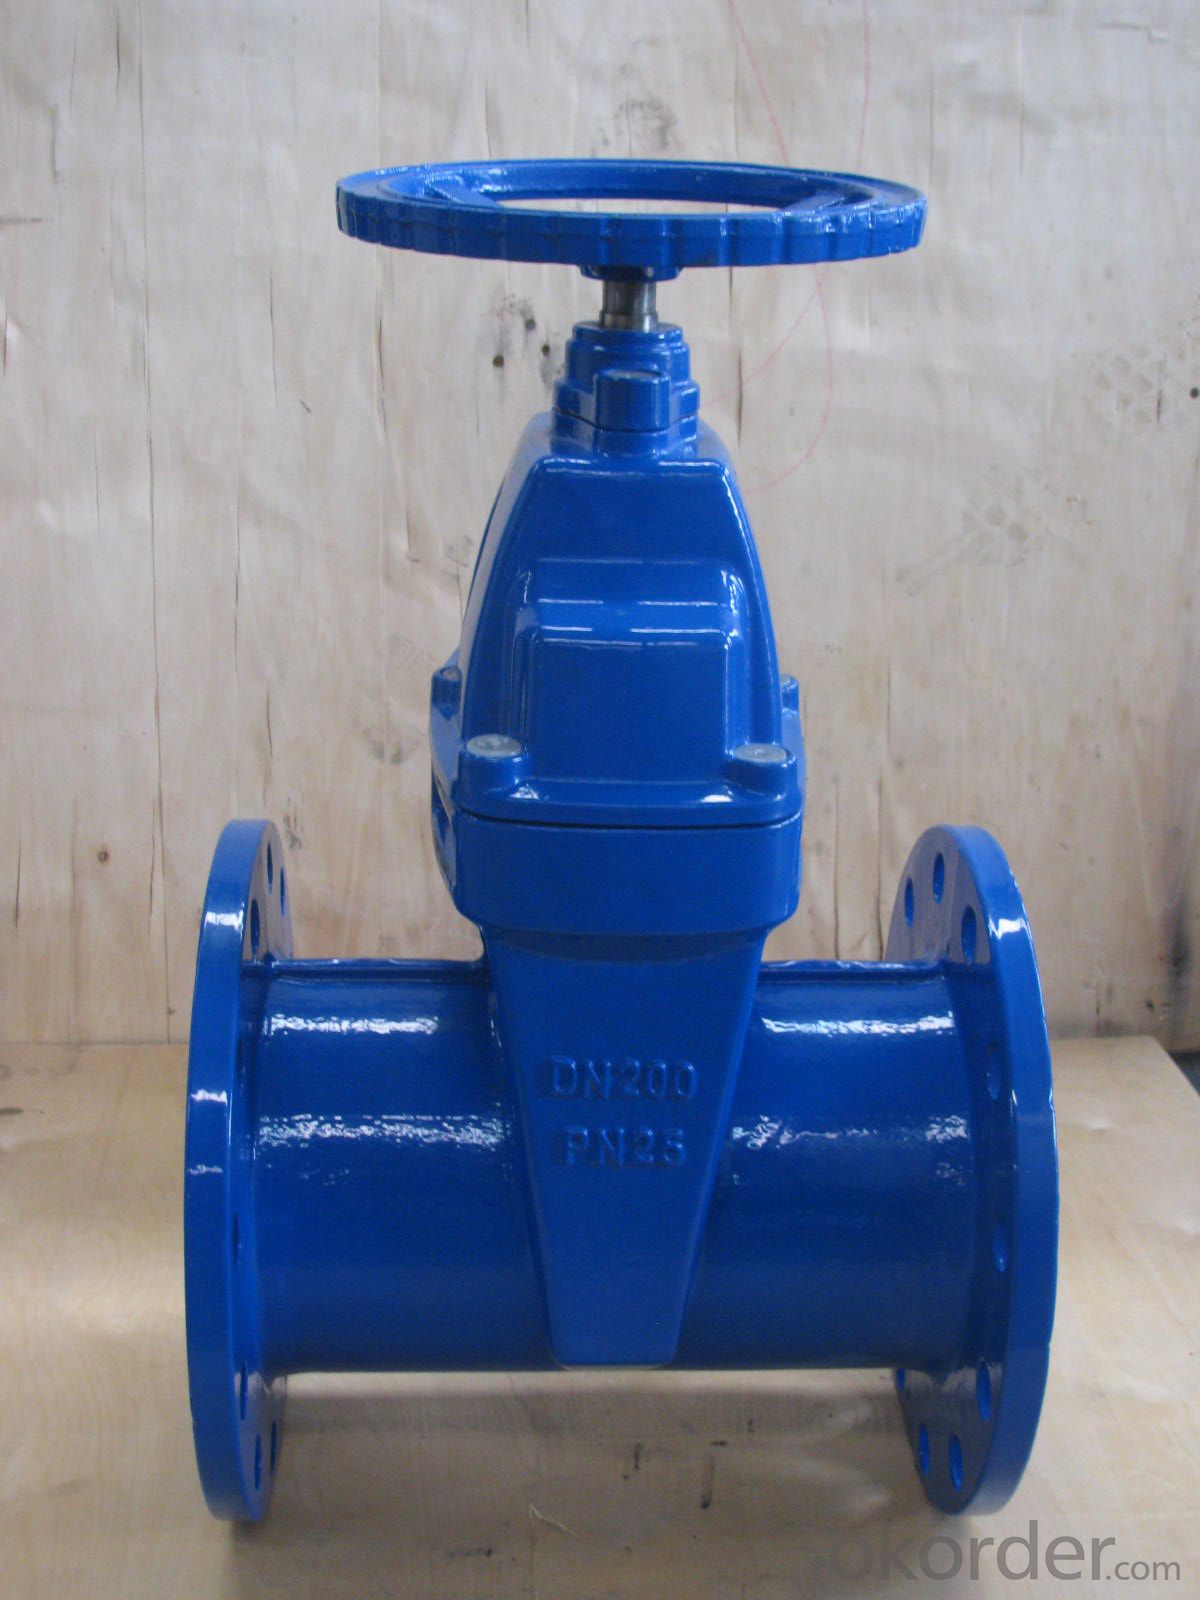 Gate Valve with Best Price with 60year Old Valve Manufacturer real-time